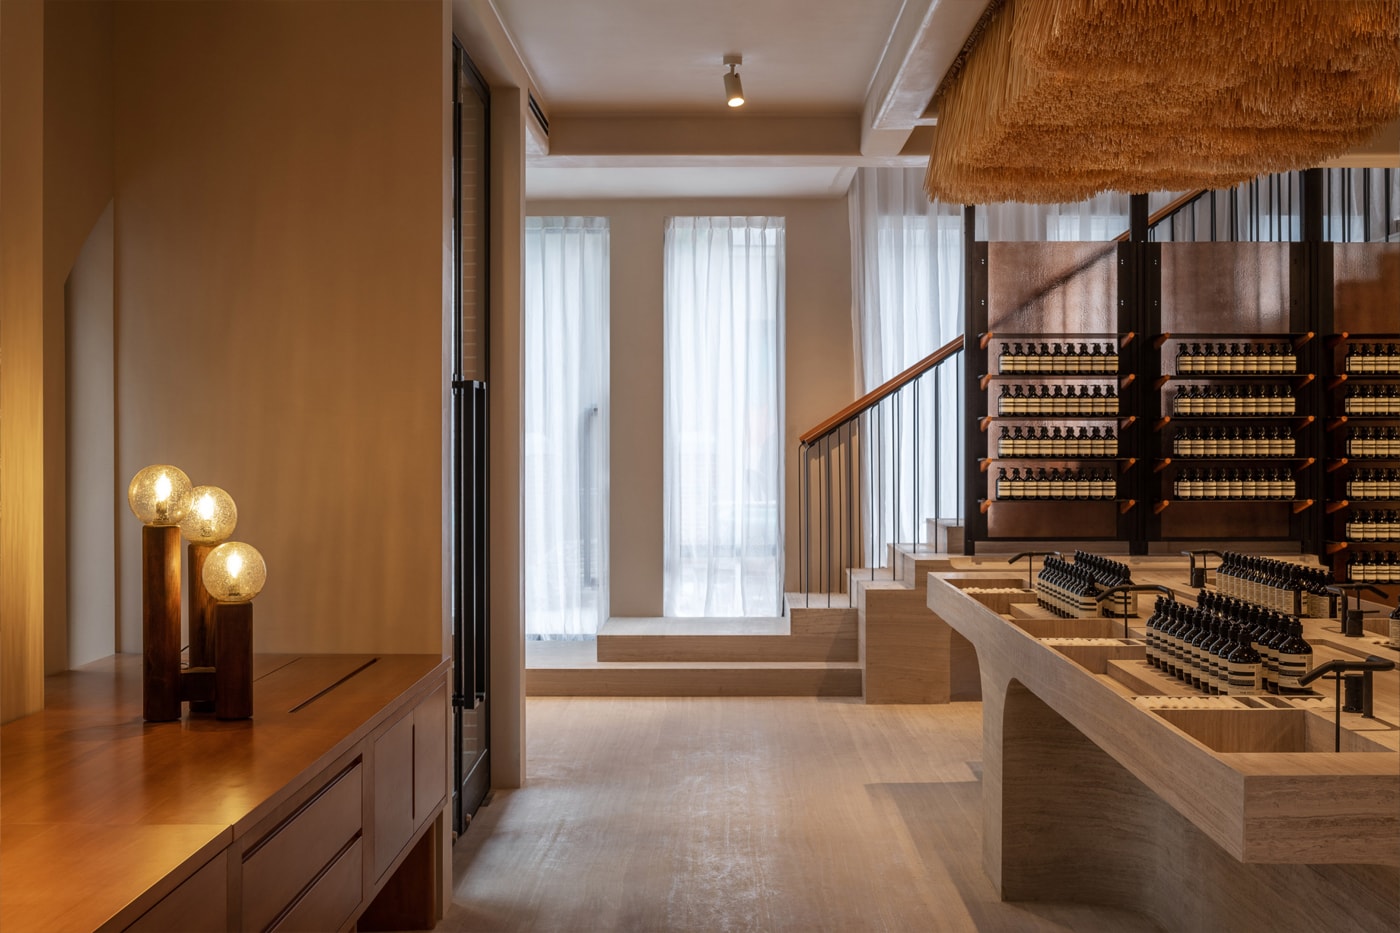 Aesop Shanghai store location dongping road puxi step inside tour fragrance soap info date review visit info